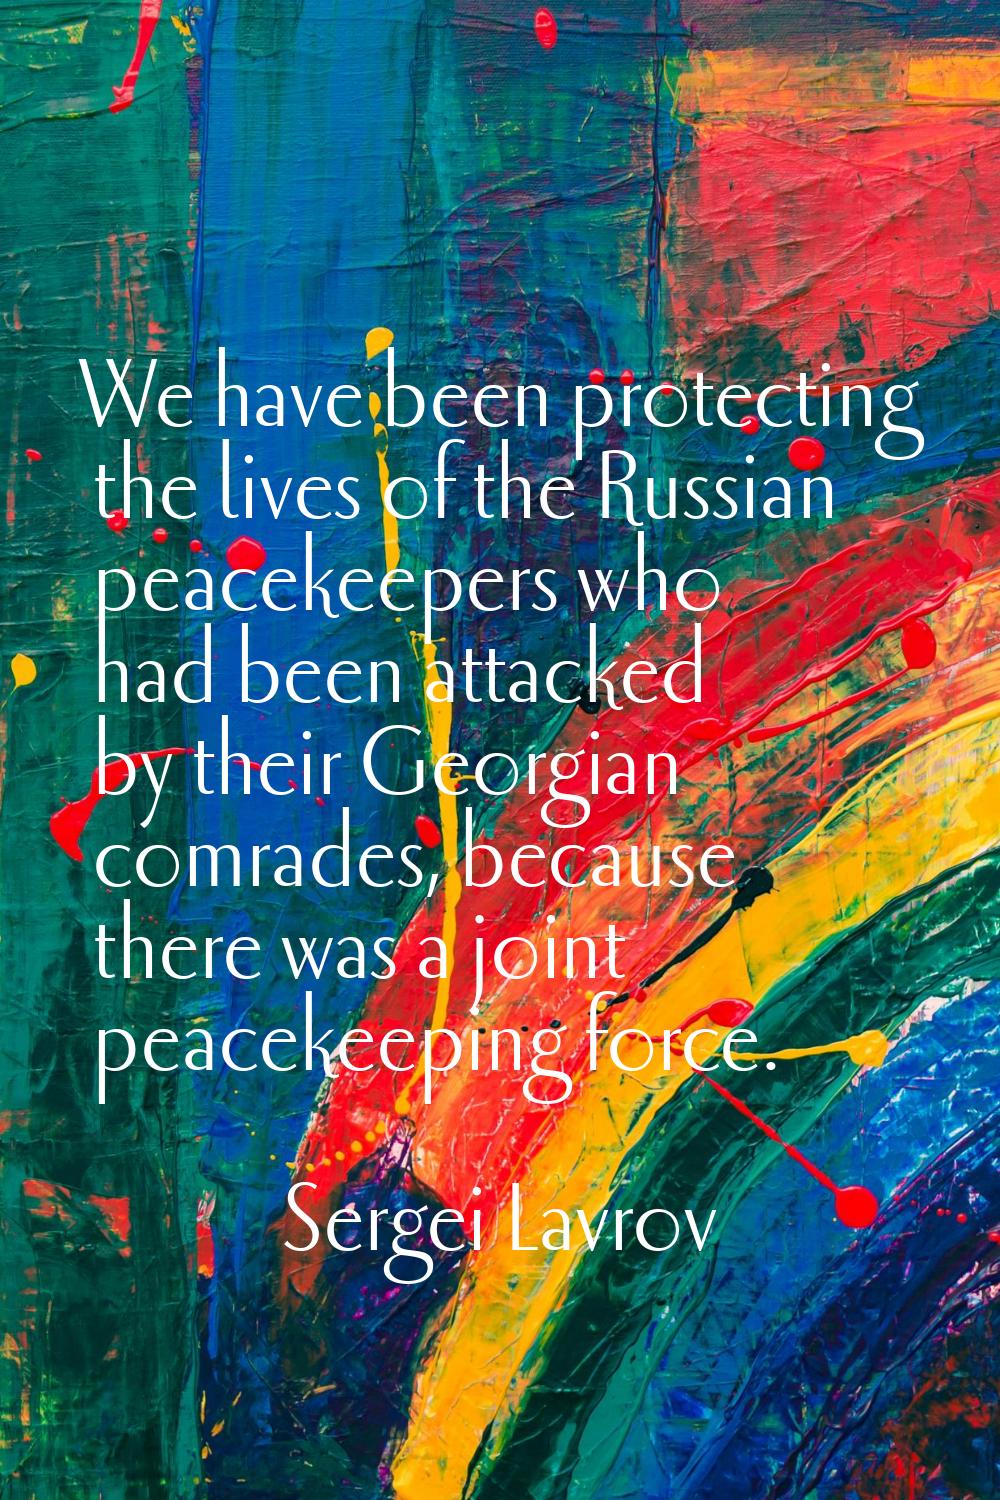 We have been protecting the lives of the Russian peacekeepers who had been attacked by their Georgi